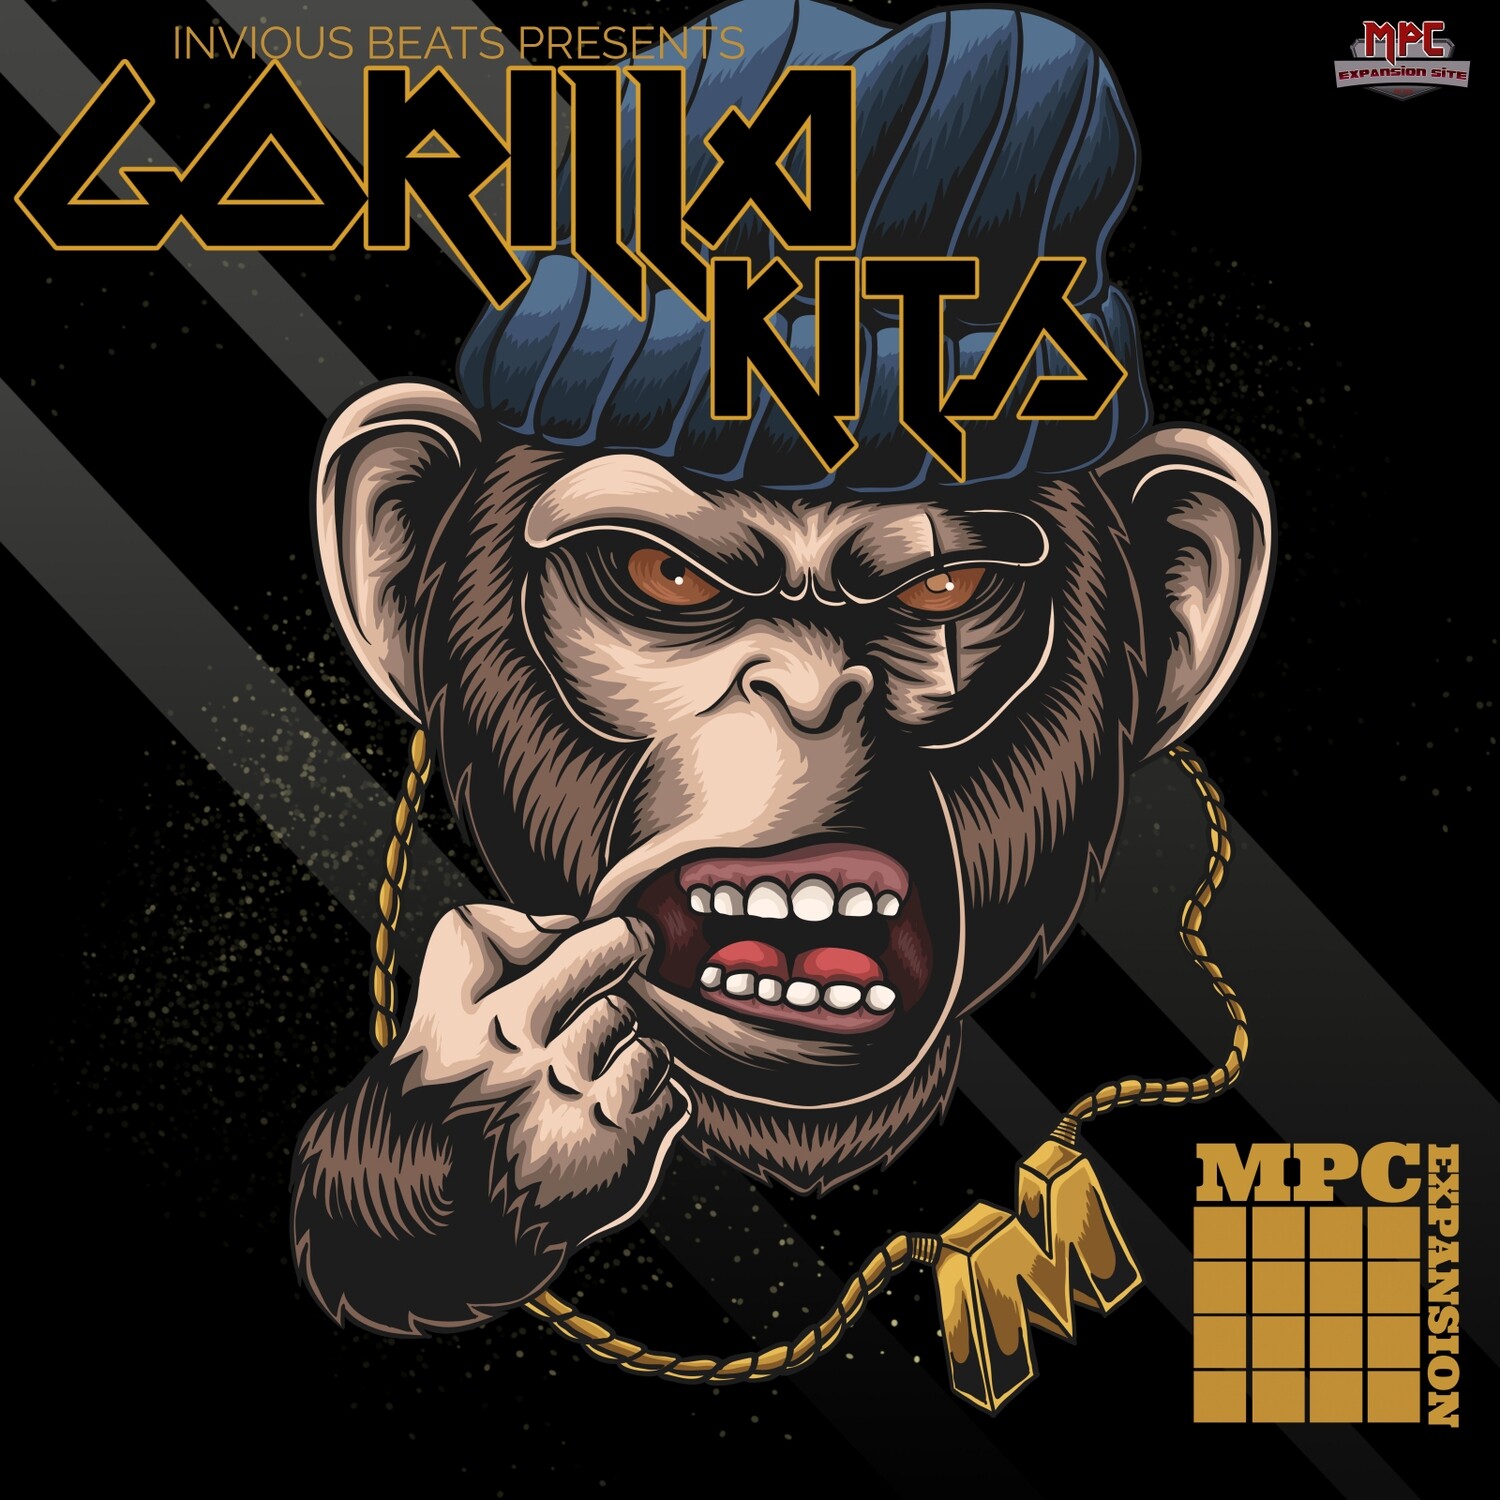 MPC EXPANSION 'GORILLA KITS' by INVIOUS